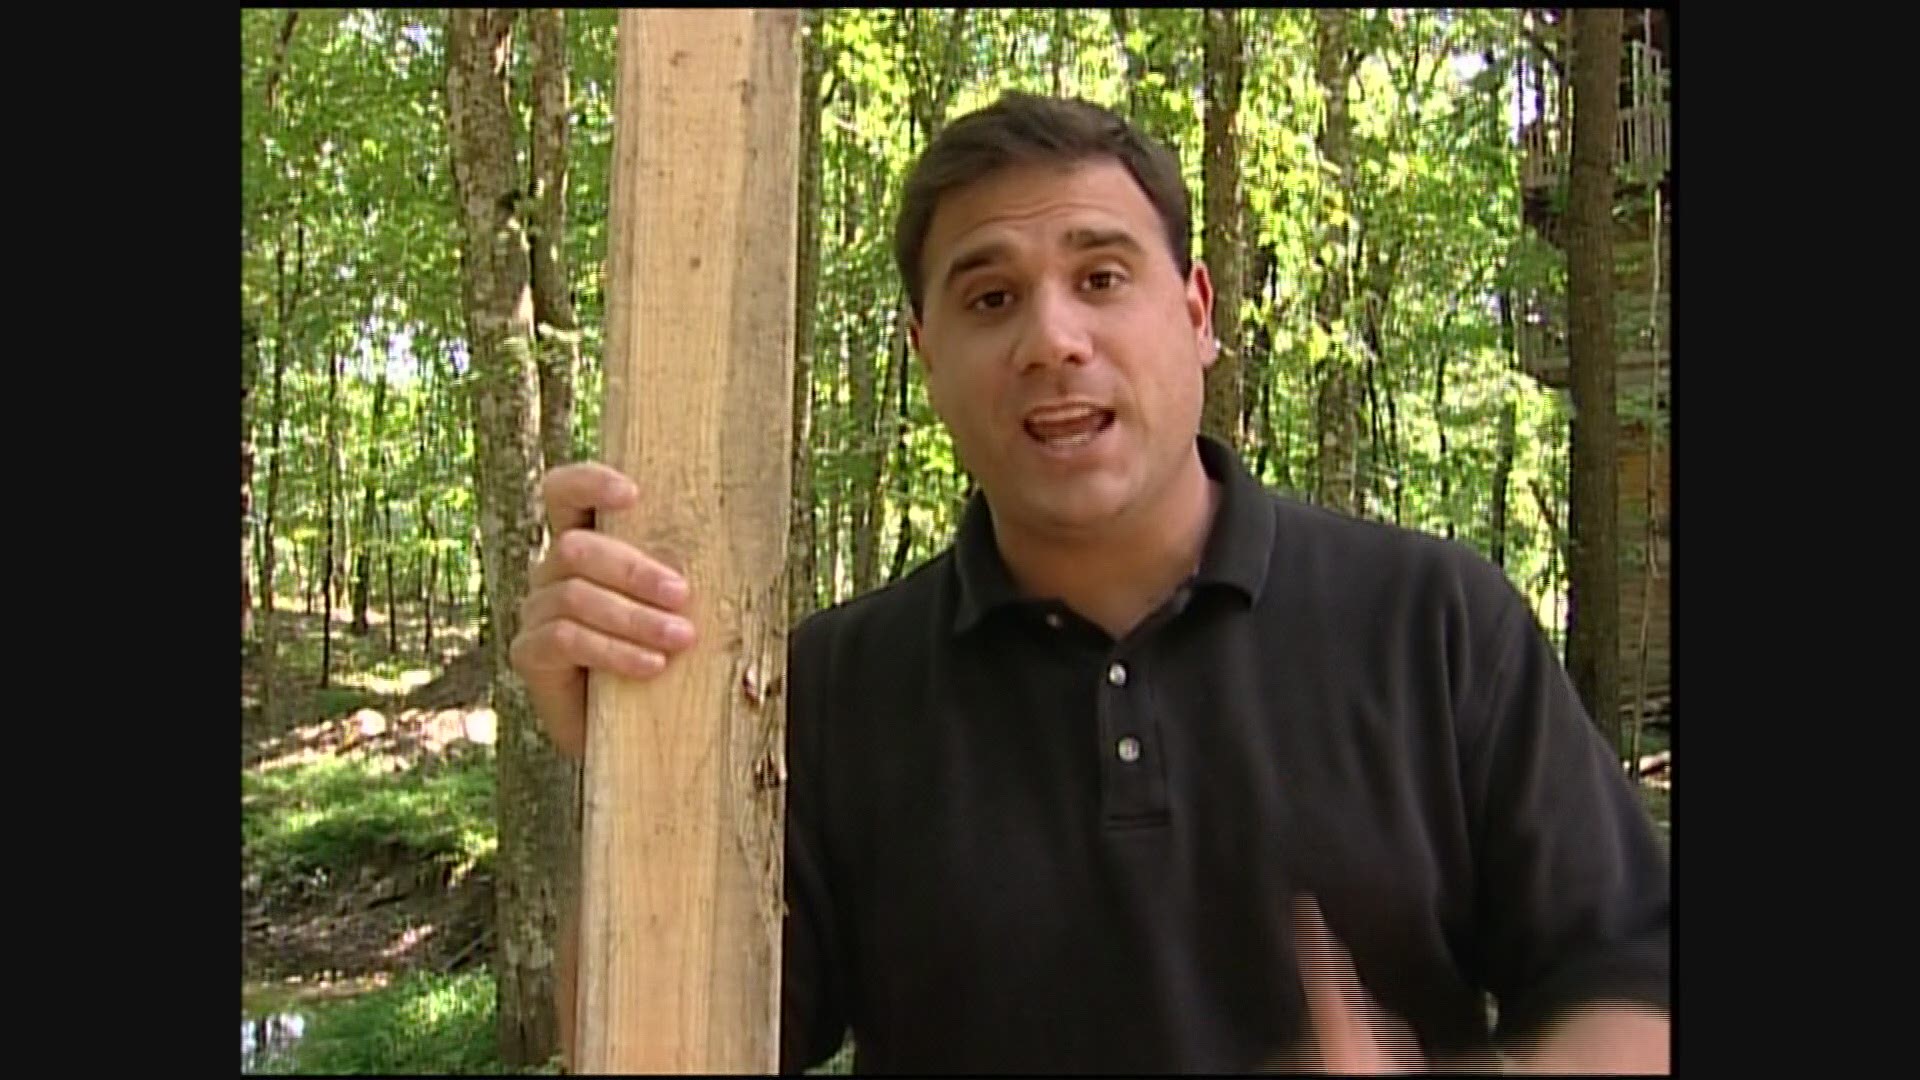 A minister built this 100-foot tall treehouse in Crossville. WBIR took a tour in 2004. The tree house was shut down in 2011 for fire code violations.